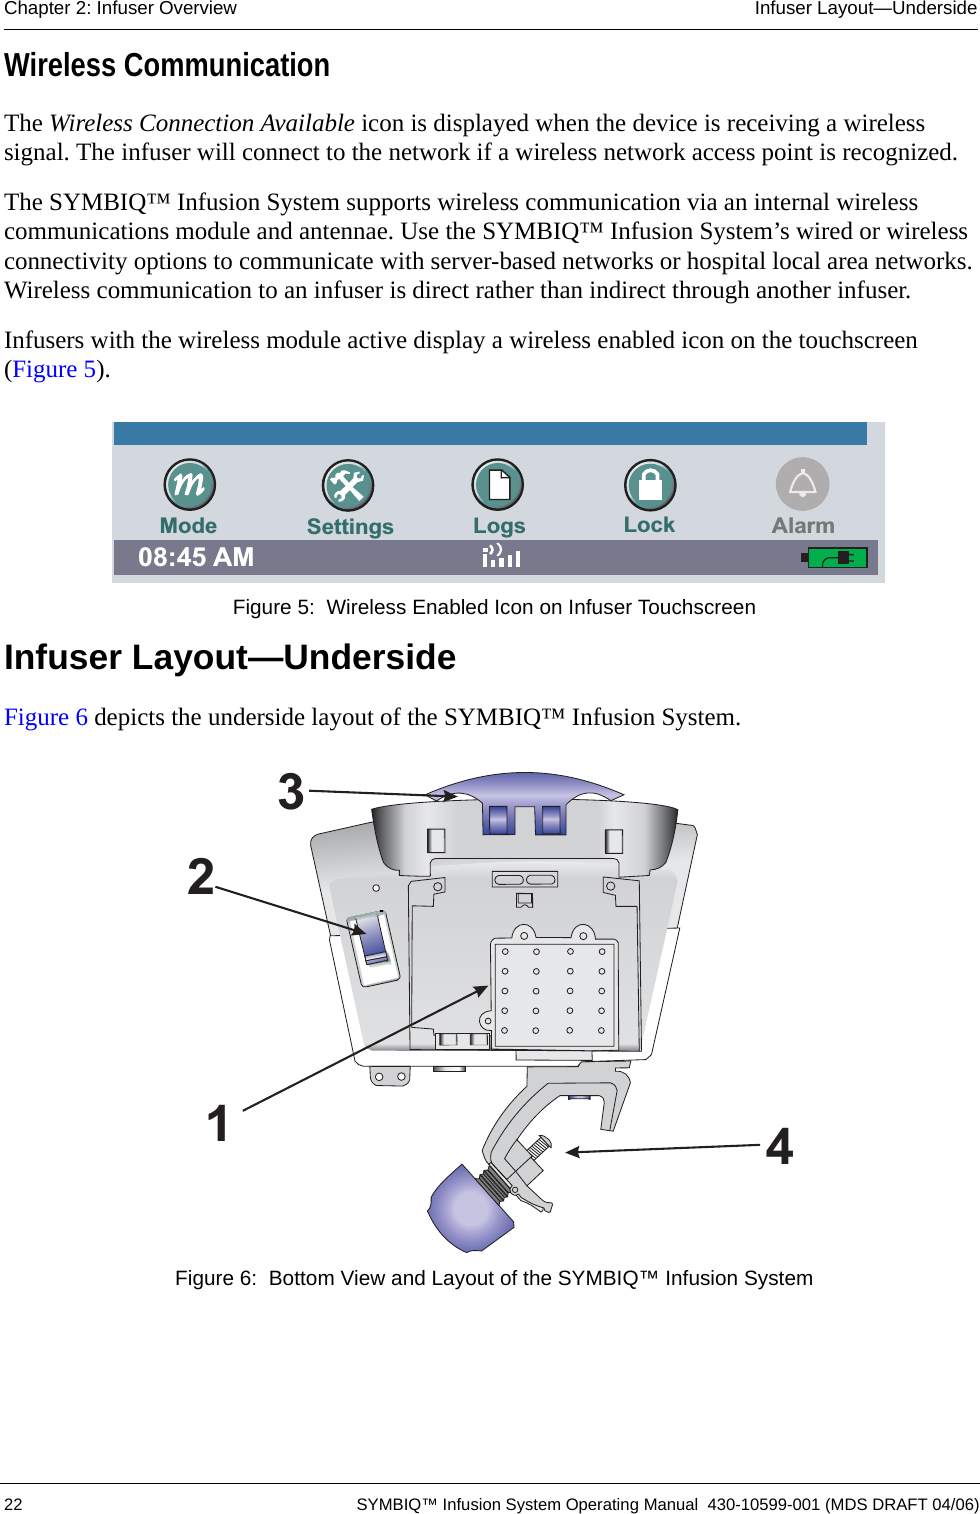  22 SYMBIQ™ Infusion System Operating Manual  430-10599-001 (MDS DRAFT 04/06)Chapter 2: Infuser Overview Infuser Layout—UndersideWireless CommunicationThe Wireless Connection Available icon is displayed when the device is receiving a wireless signal. The infuser will connect to the network if a wireless network access point is recognized.The SYMBIQ™ Infusion System supports wireless communication via an internal wireless communications module and antennae. Use the SYMBIQ™ Infusion System’s wired or wireless connectivity options to communicate with server-based networks or hospital local area networks. Wireless communication to an infuser is direct rather than indirect through another infuser. Infusers with the wireless module active display a wireless enabled icon on the touchscreen (Figure 5). Figure 5:  Wireless Enabled Icon on Infuser TouchscreenInfuser Layout—UndersideFigure 6 depicts the underside layout of the SYMBIQ™ Infusion System. Figure 6:  Bottom View and Layout of the SYMBIQ™ Infusion SystemSettings Logs Lock08:45 AMMode Alarm2341